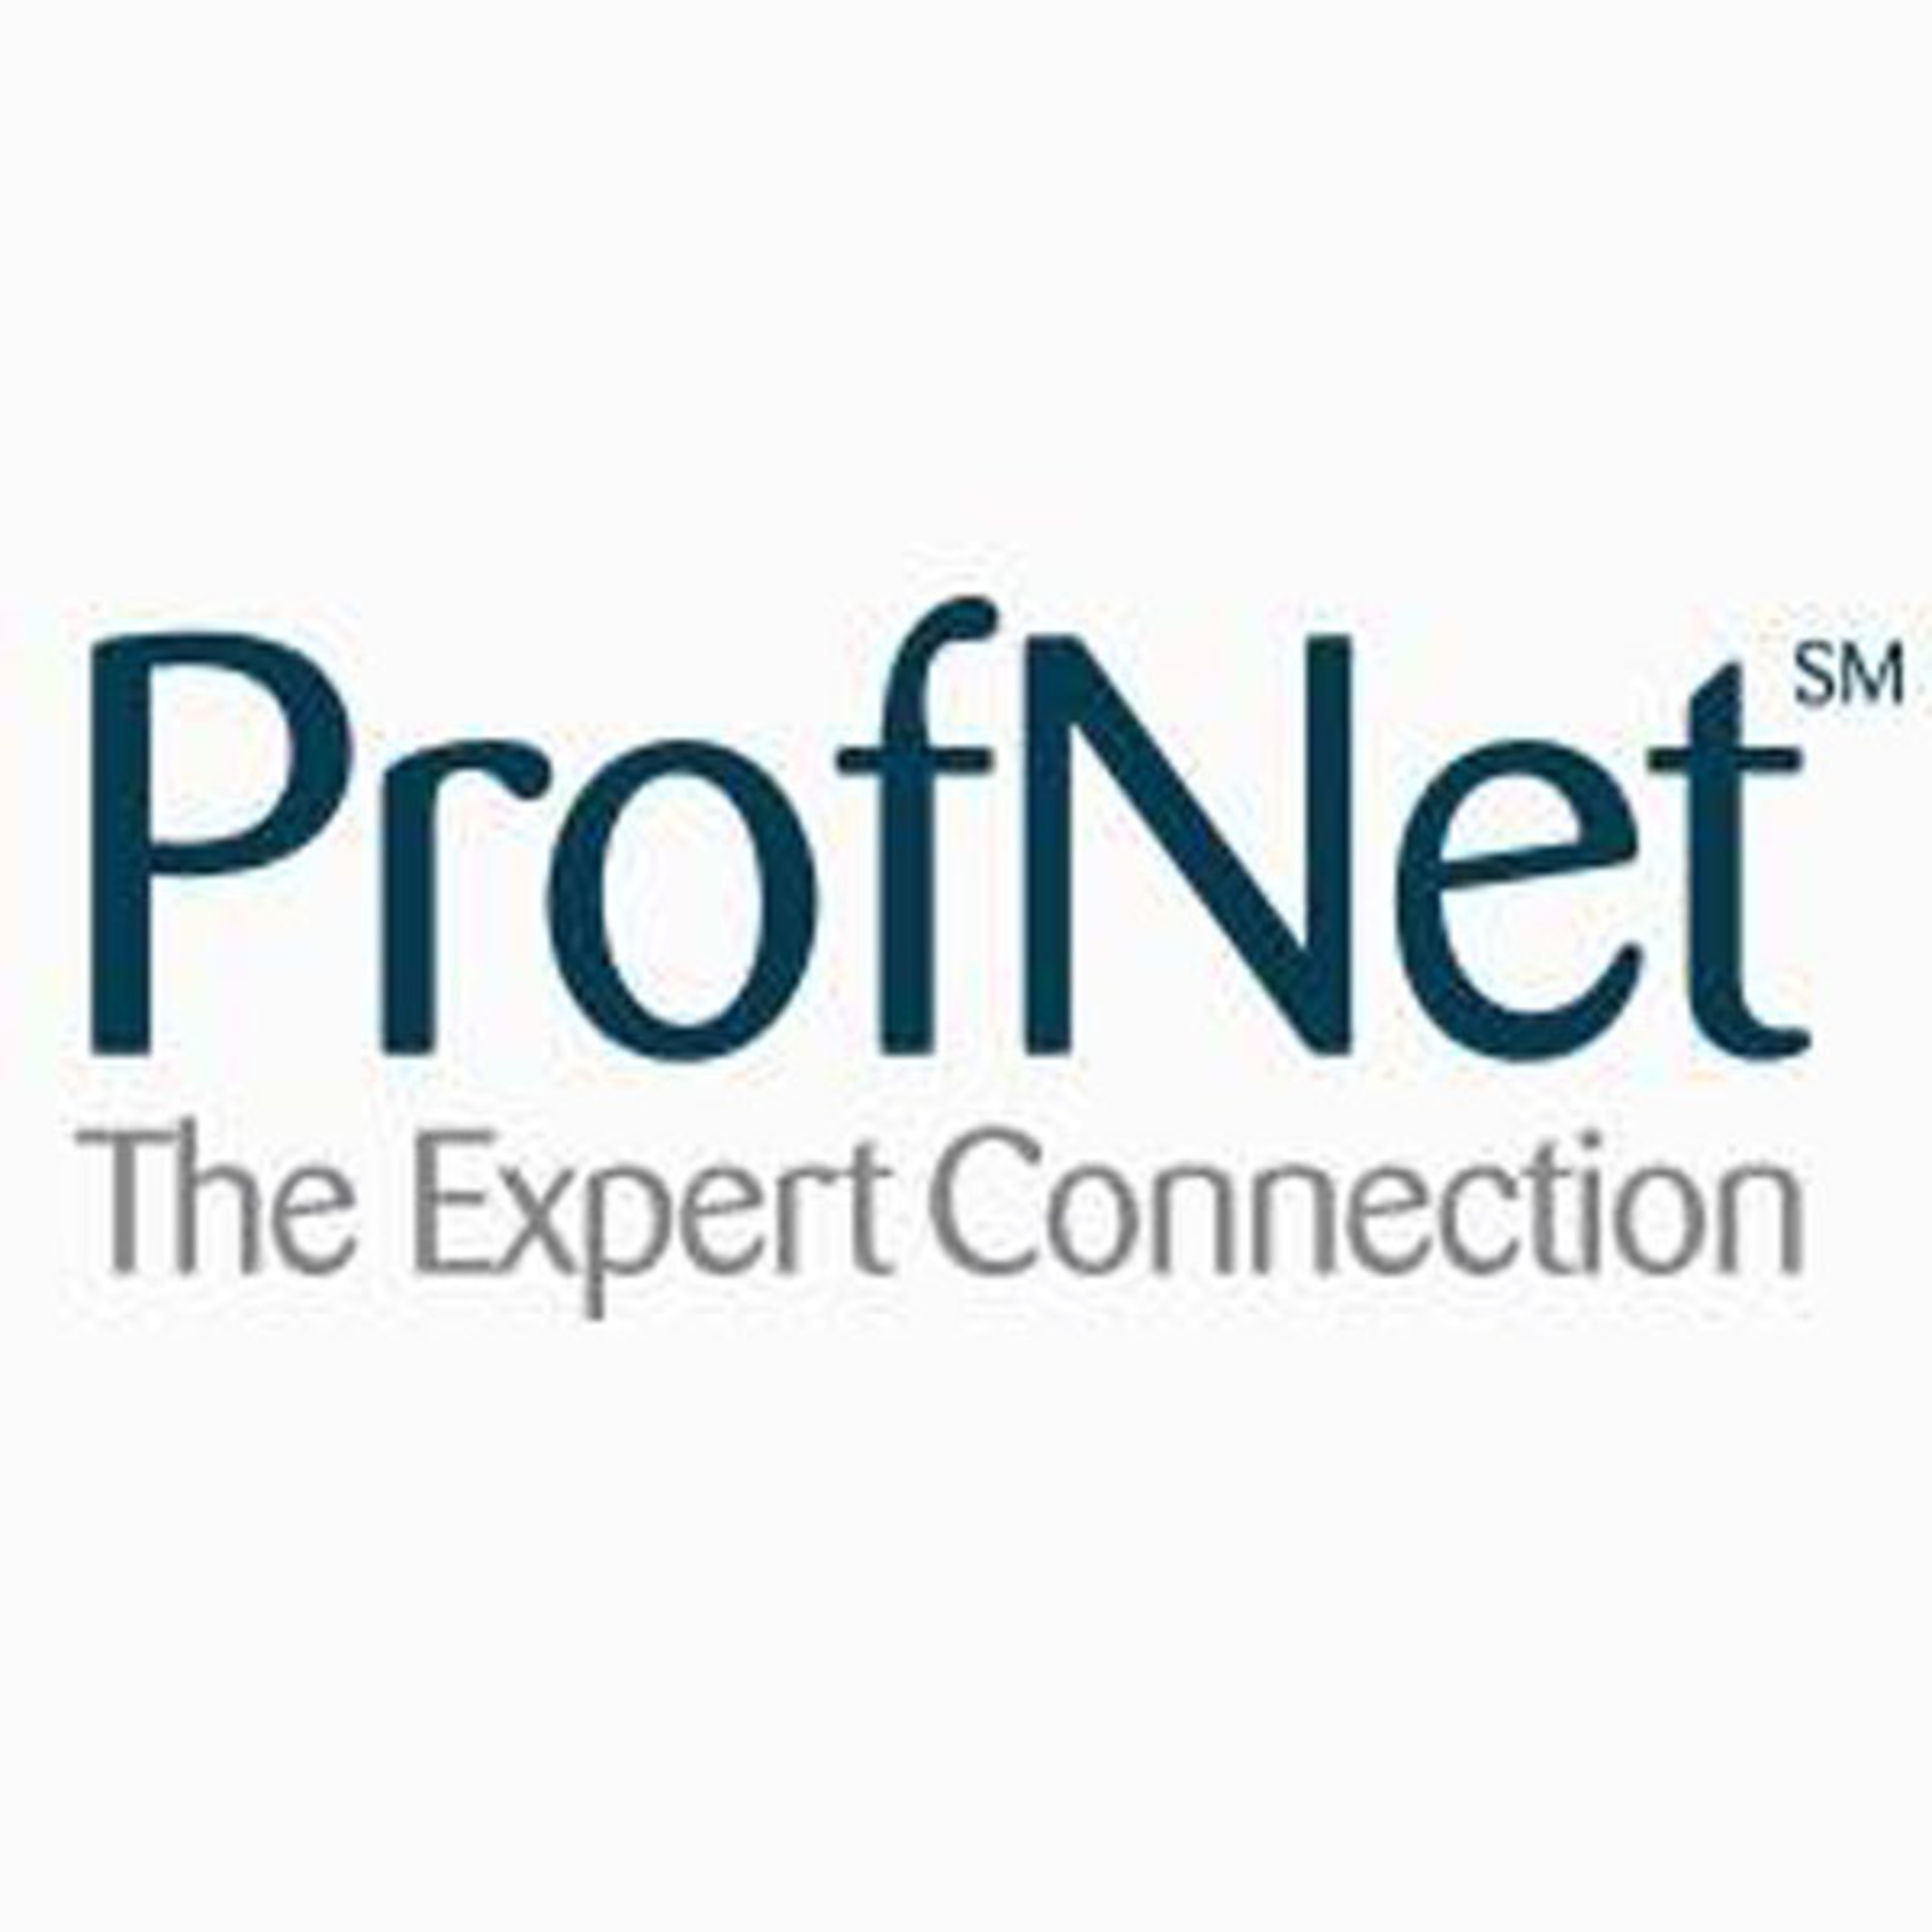 ProfNet is a service that connects journalists with subject matter experts at no charge. Find out more at http://www.profnet.com